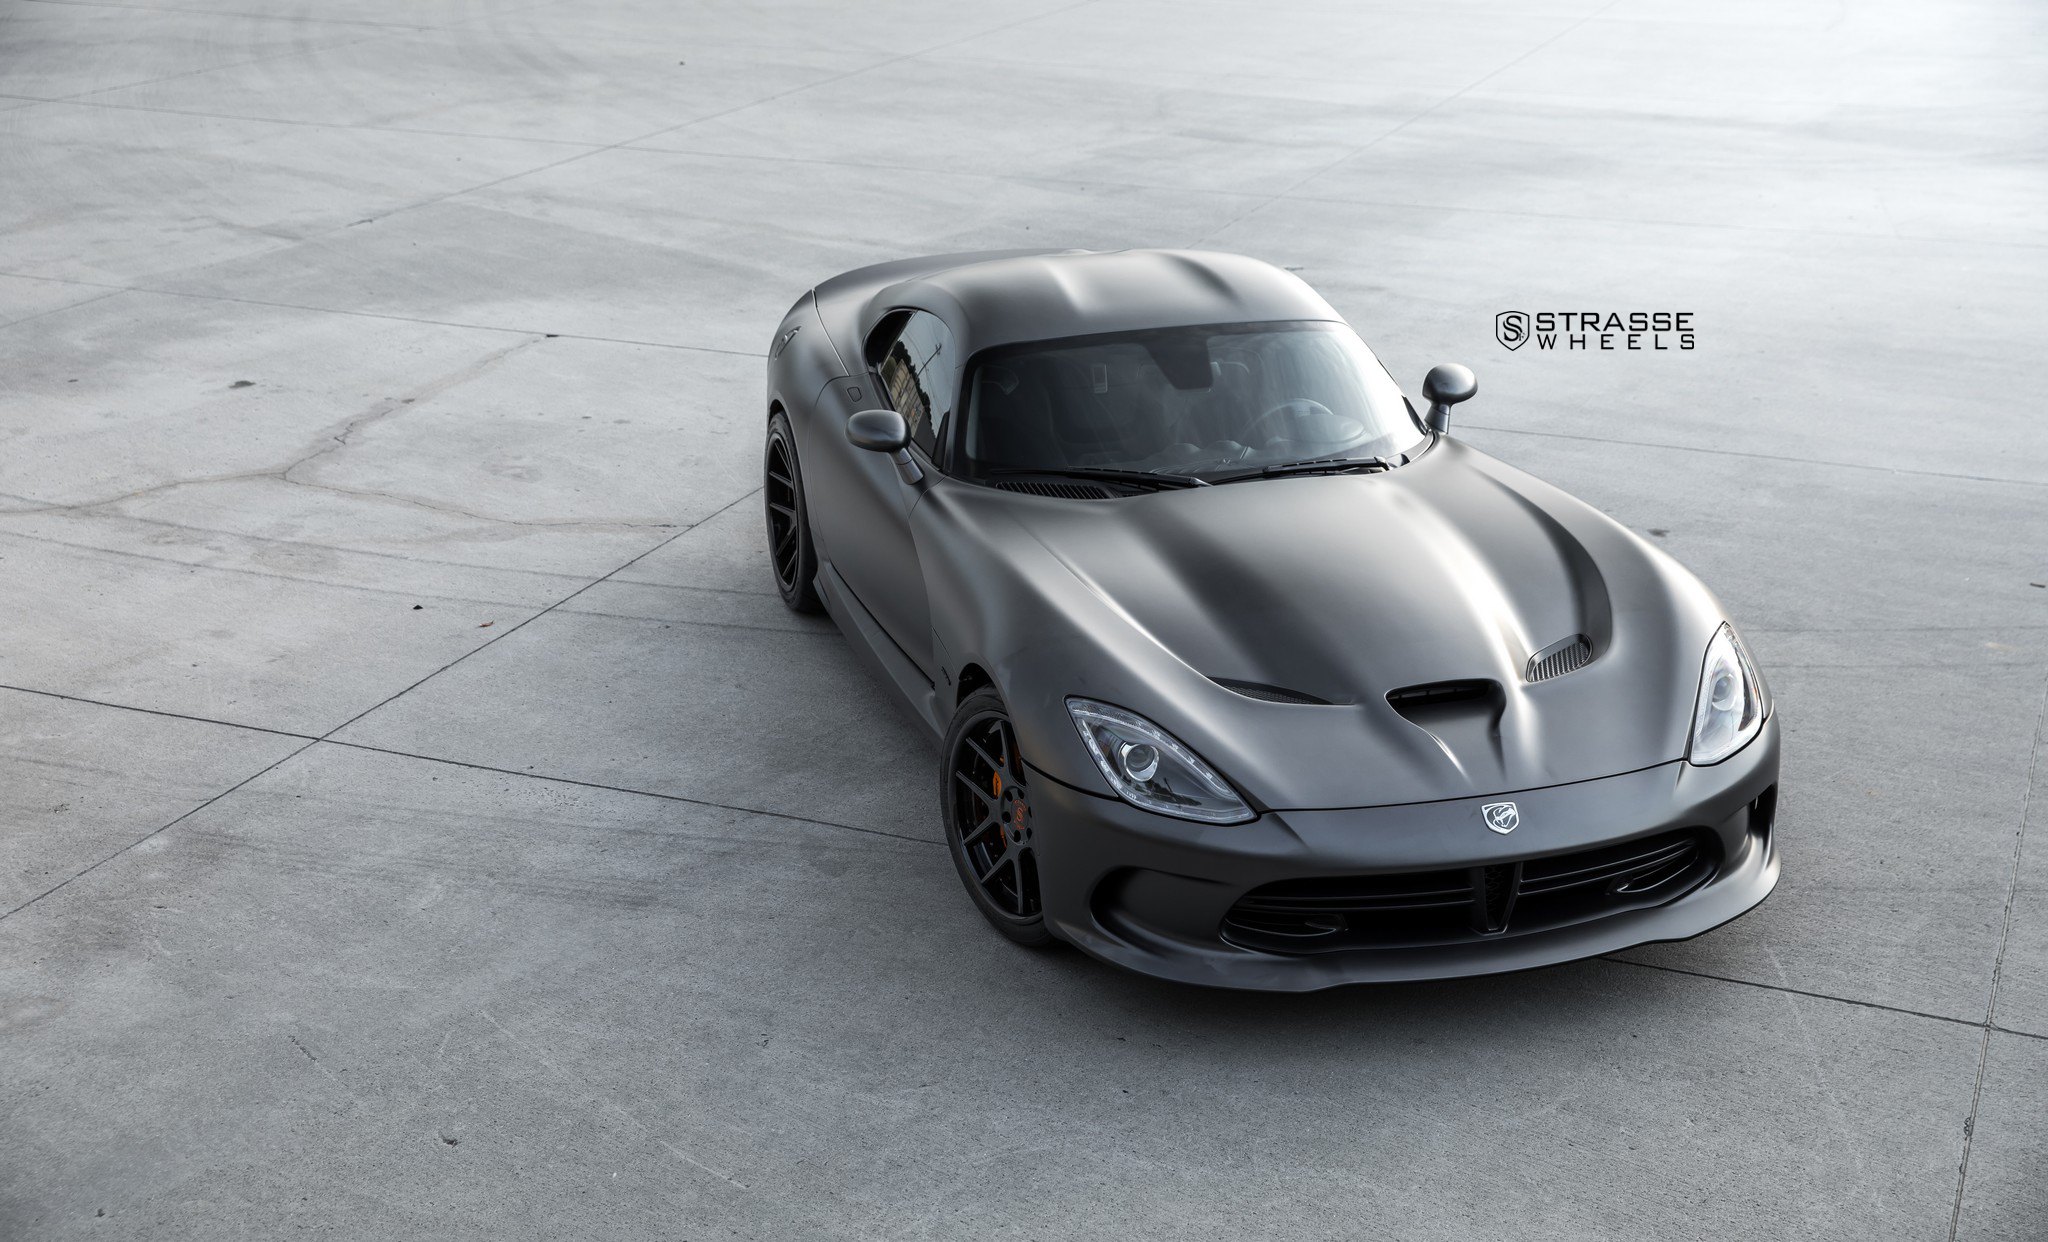 Gray Dodge Viper with Custom Vented Hood - Photo by Strasse Forged